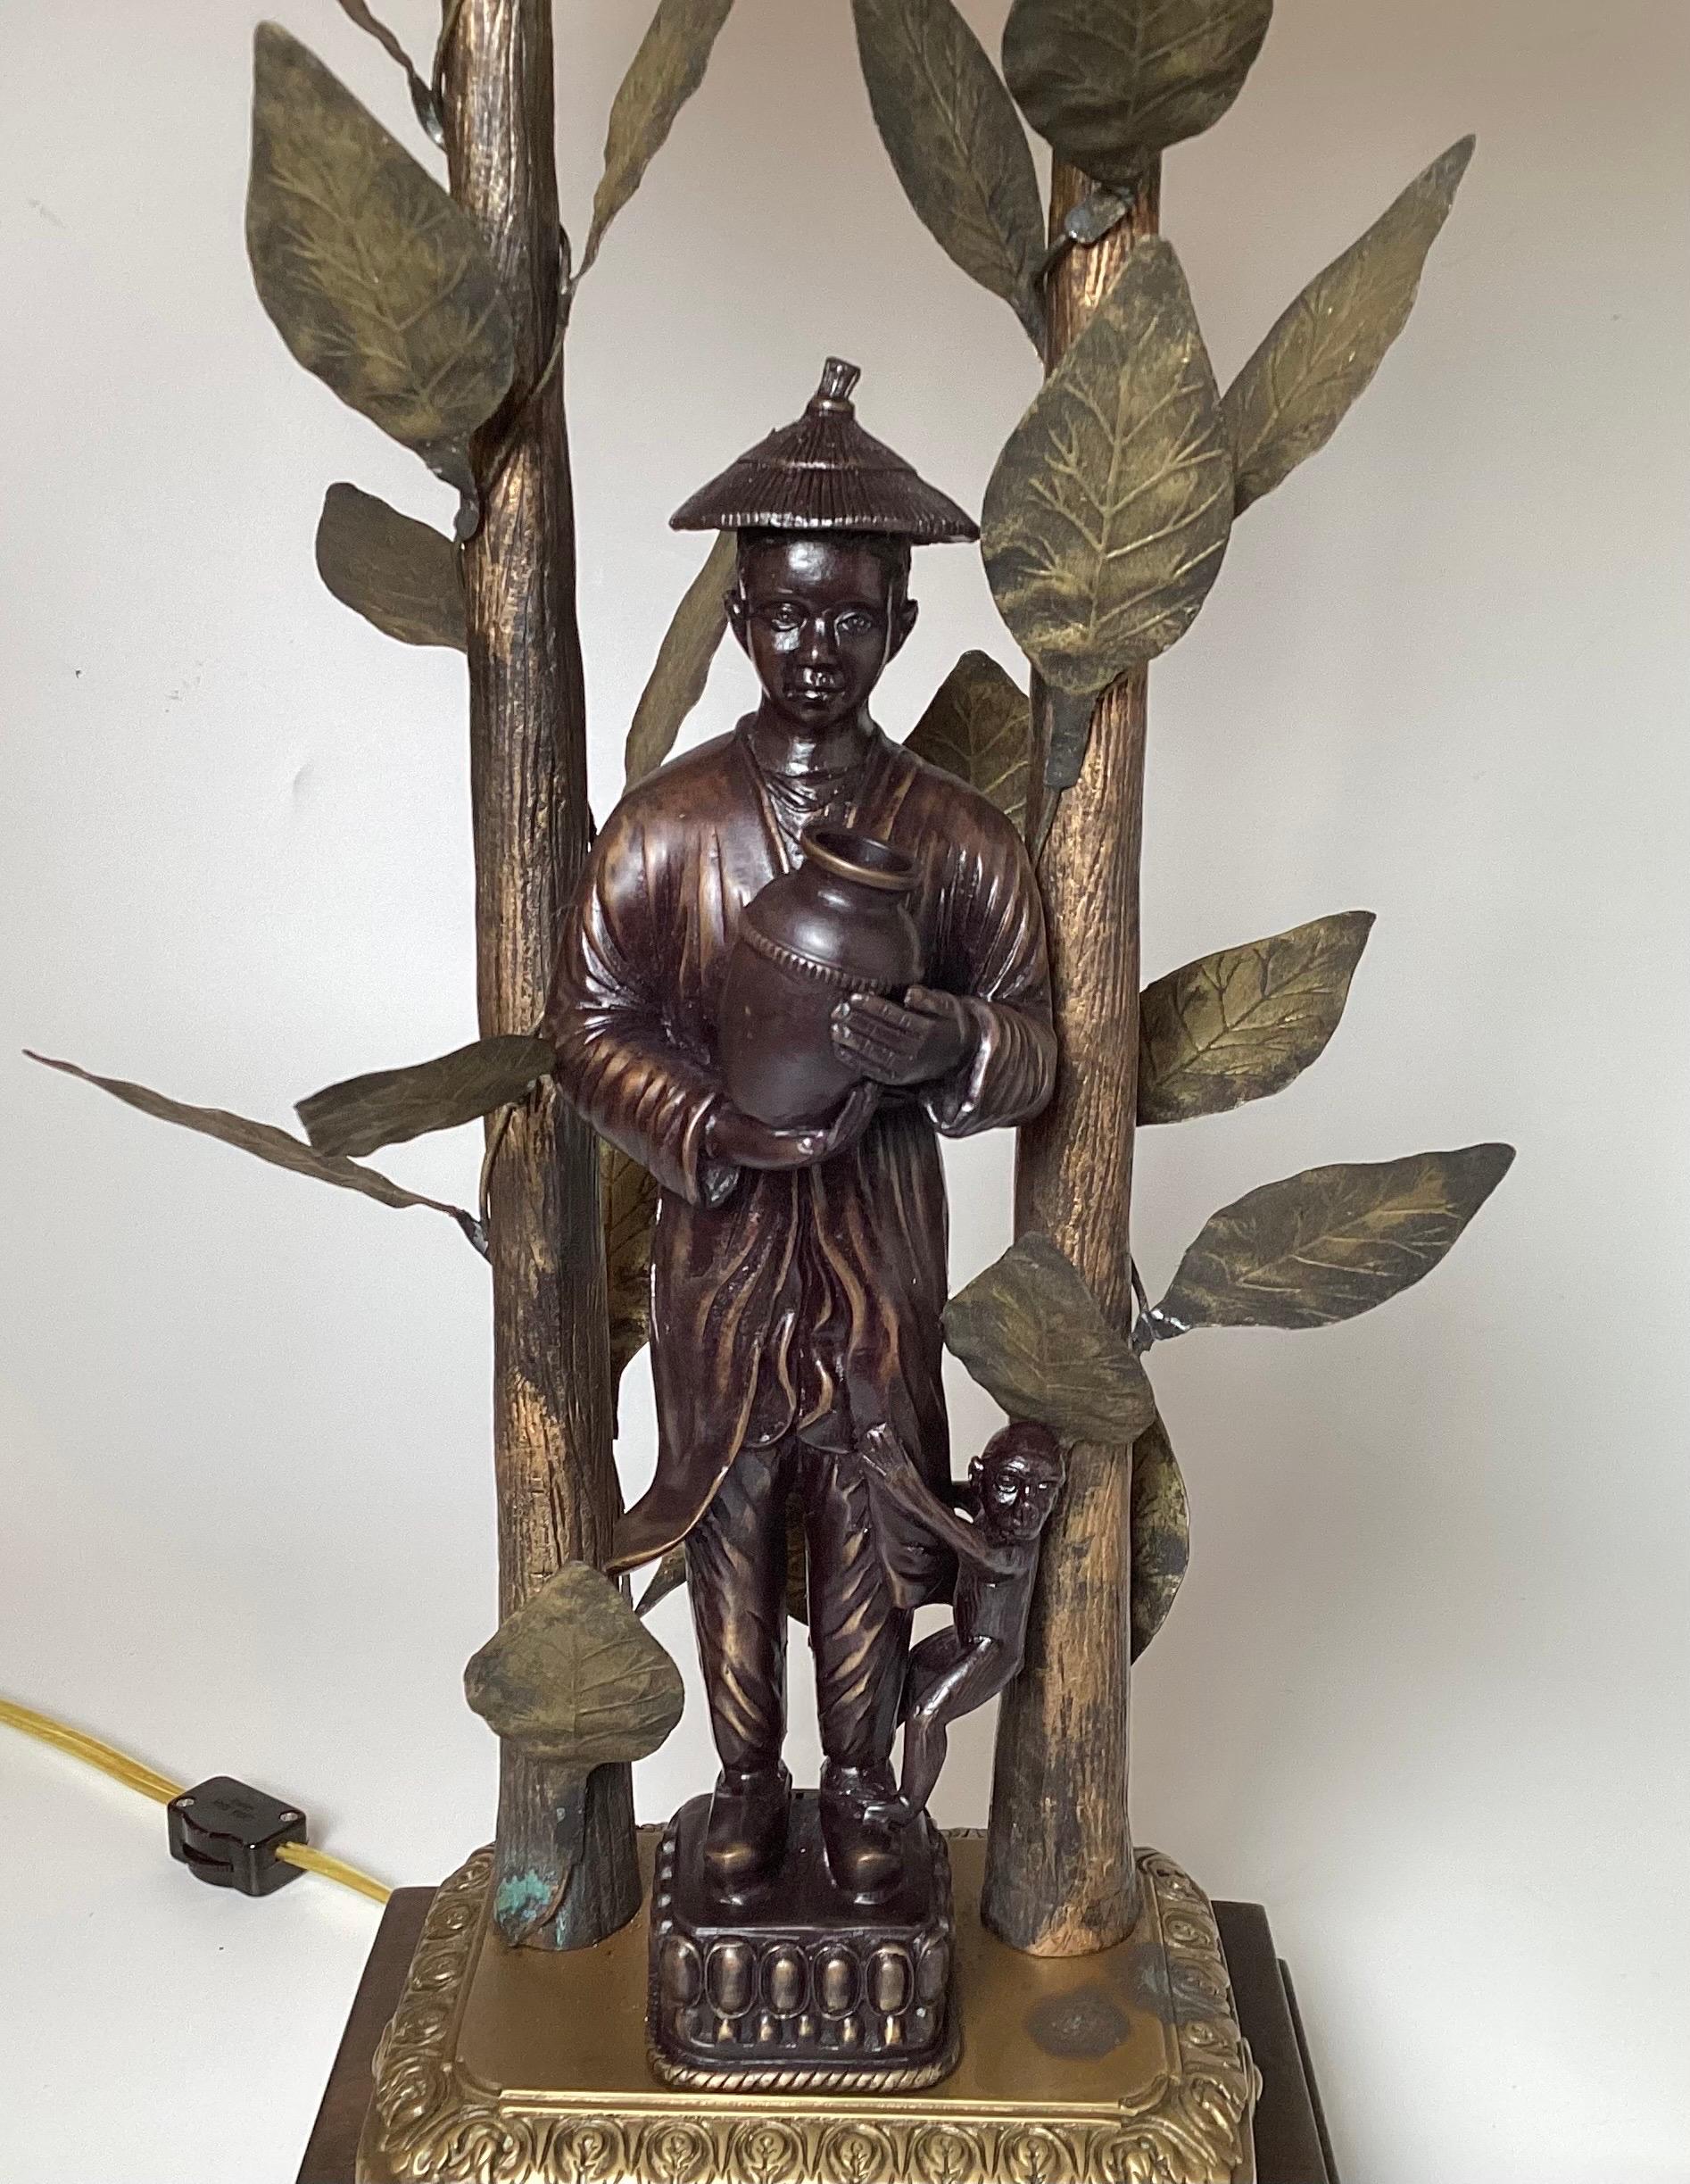 A pair of whimsical Chinoiserie style patinated lamps by Frederick Cooper. The bamboo motif sides with bamboo leaves with an Asian man carrying a water jug. The bronze is two tone which sets off the beautiful design.